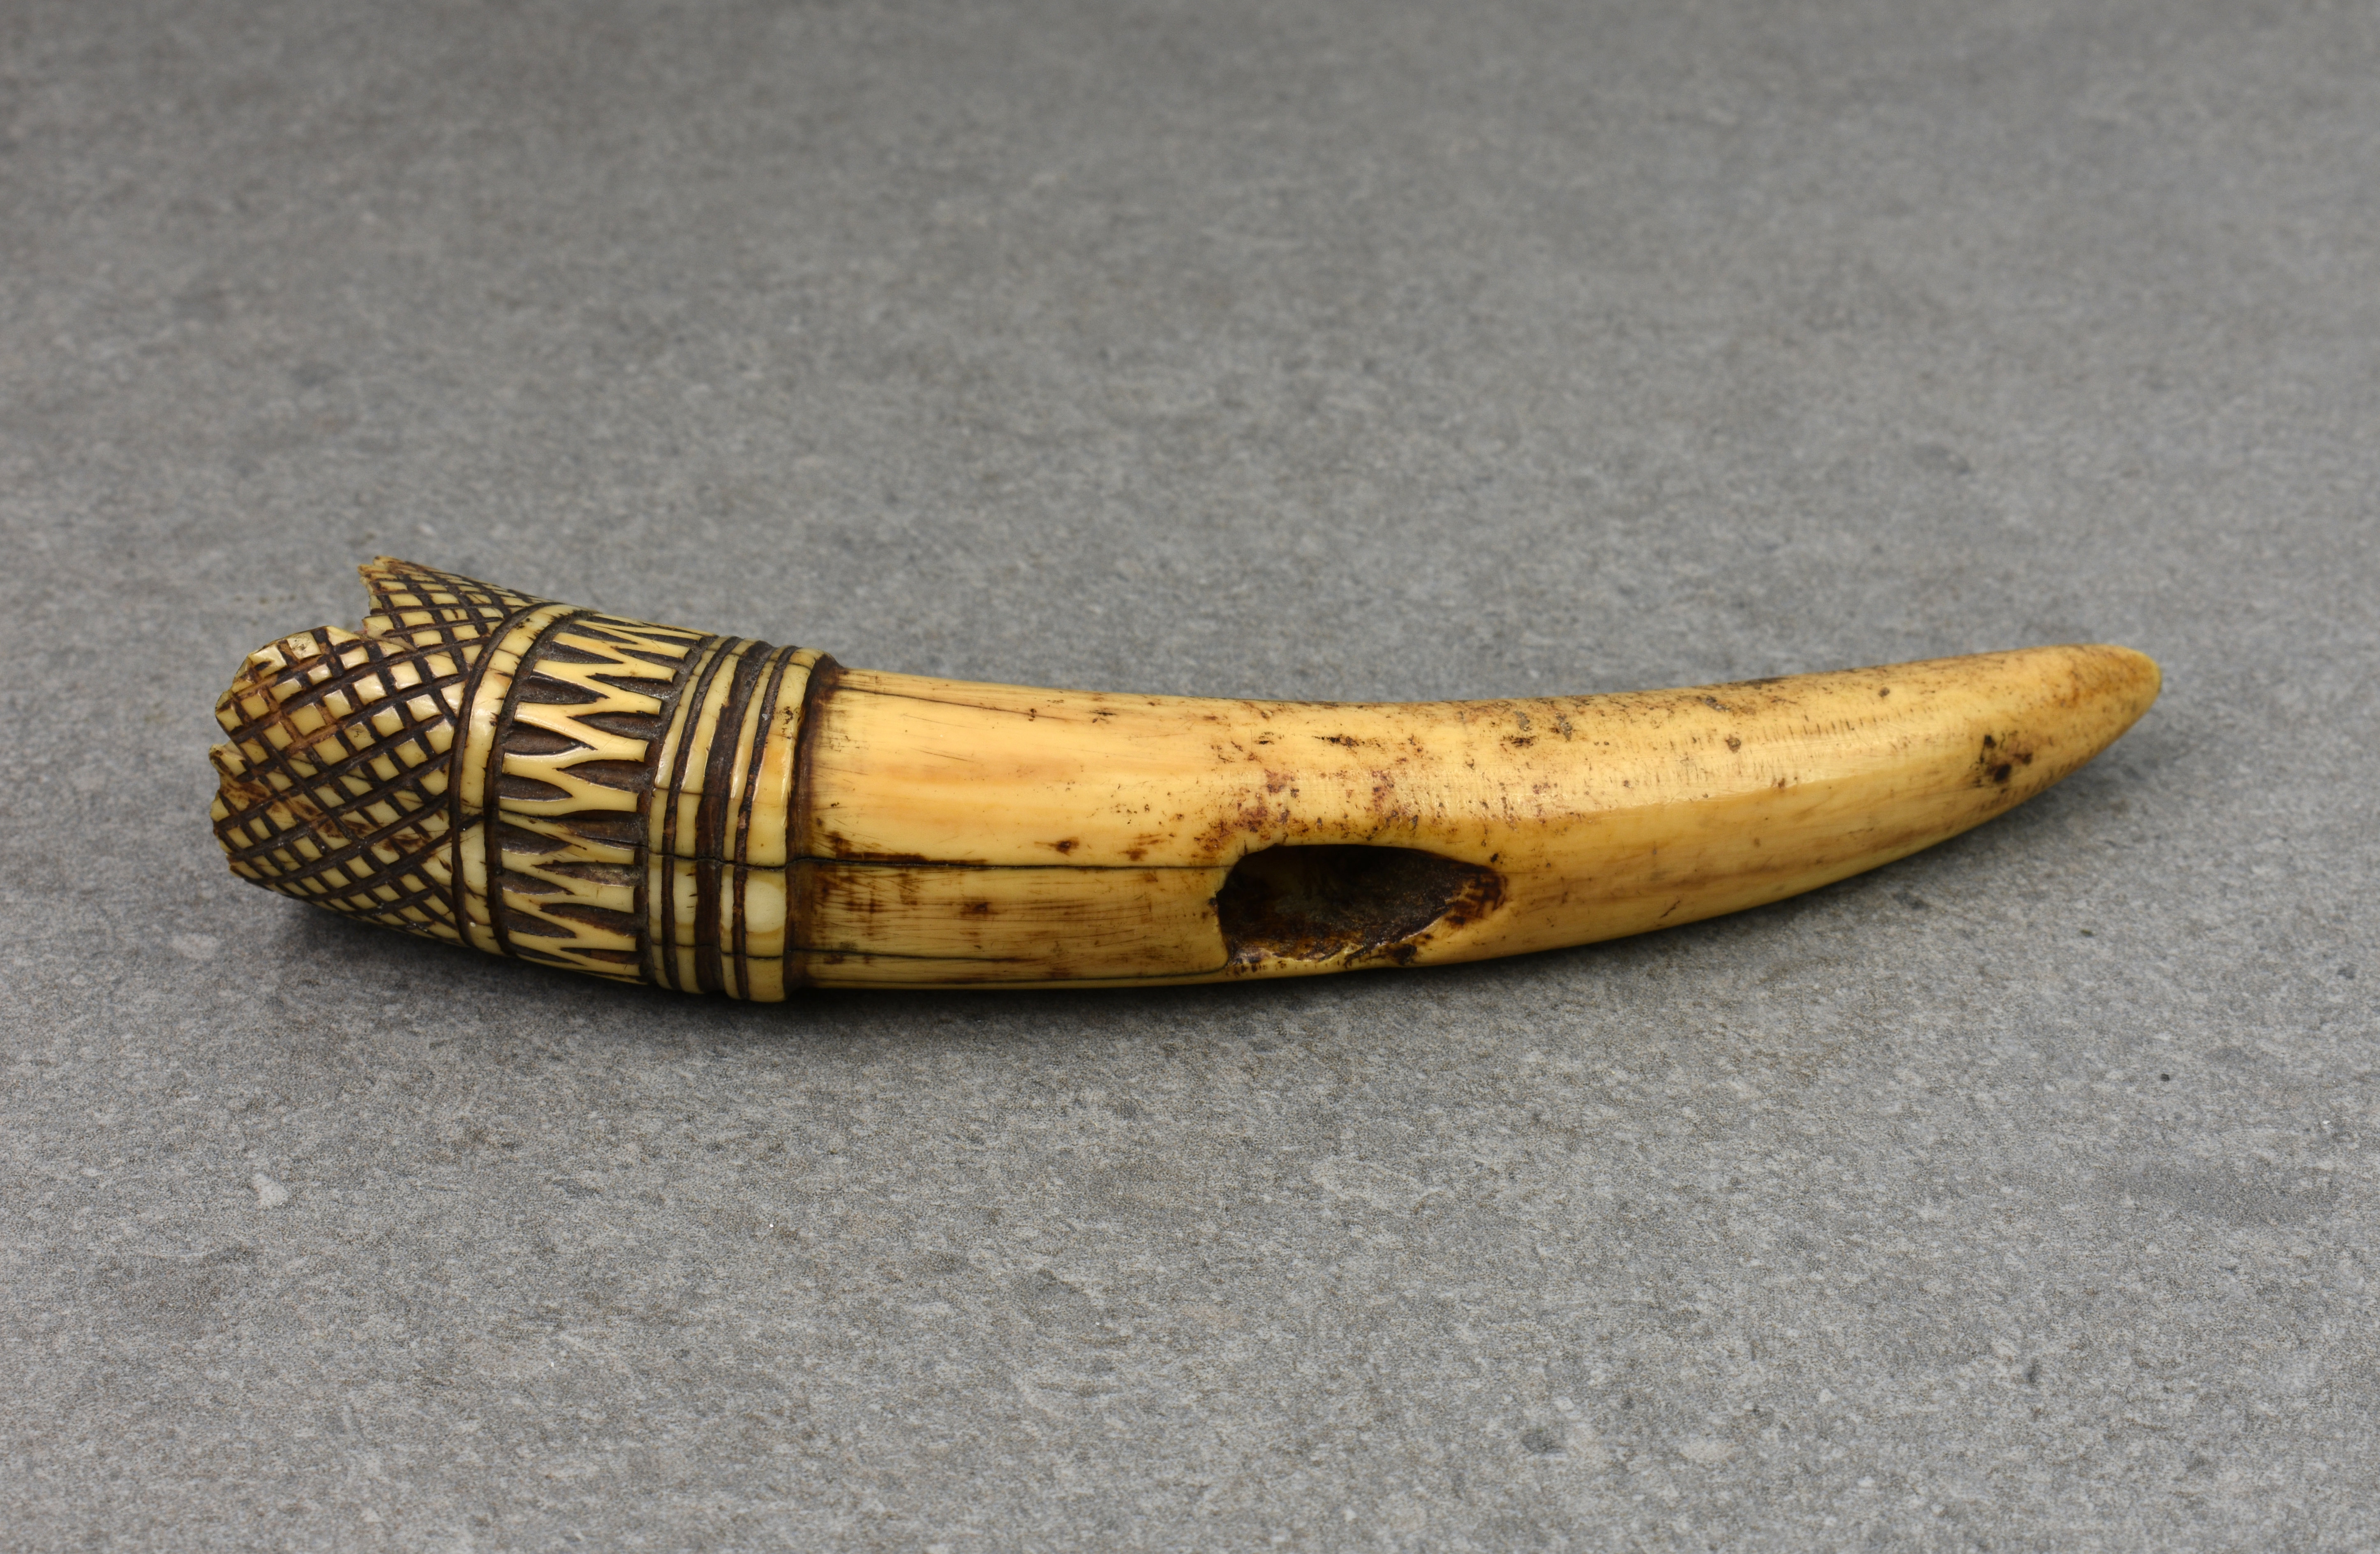 A 19th century or earlier carved African tribal tusk ornament, probably used hanging from a - Image 2 of 3